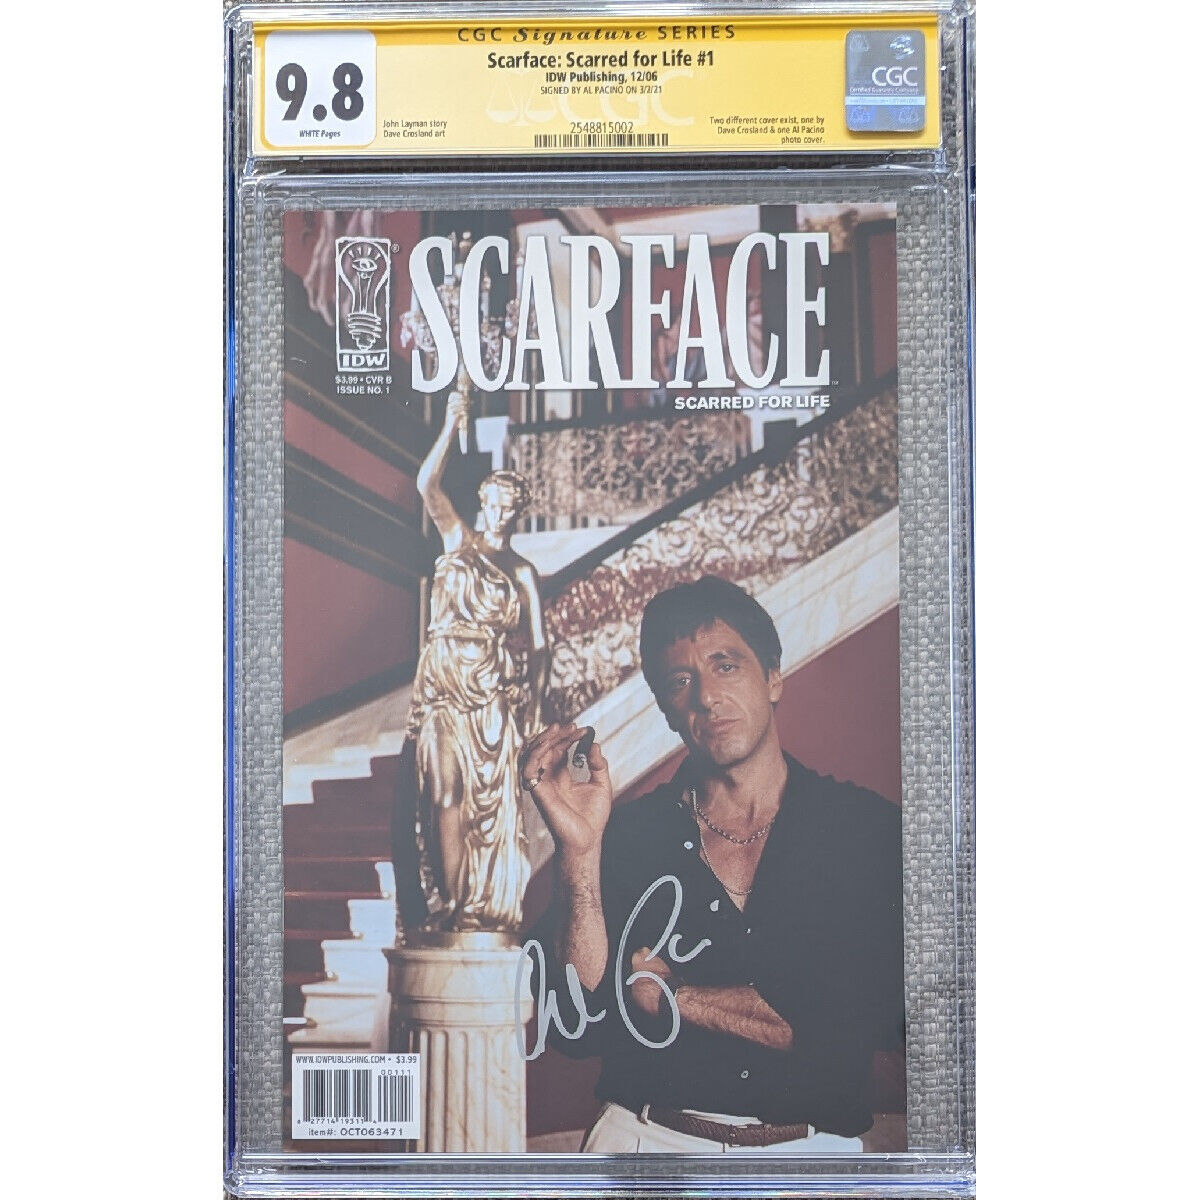 Scarface: Scarred for Life #1 photo cover__CGC 9.8 SS__Signed by Al Pacino